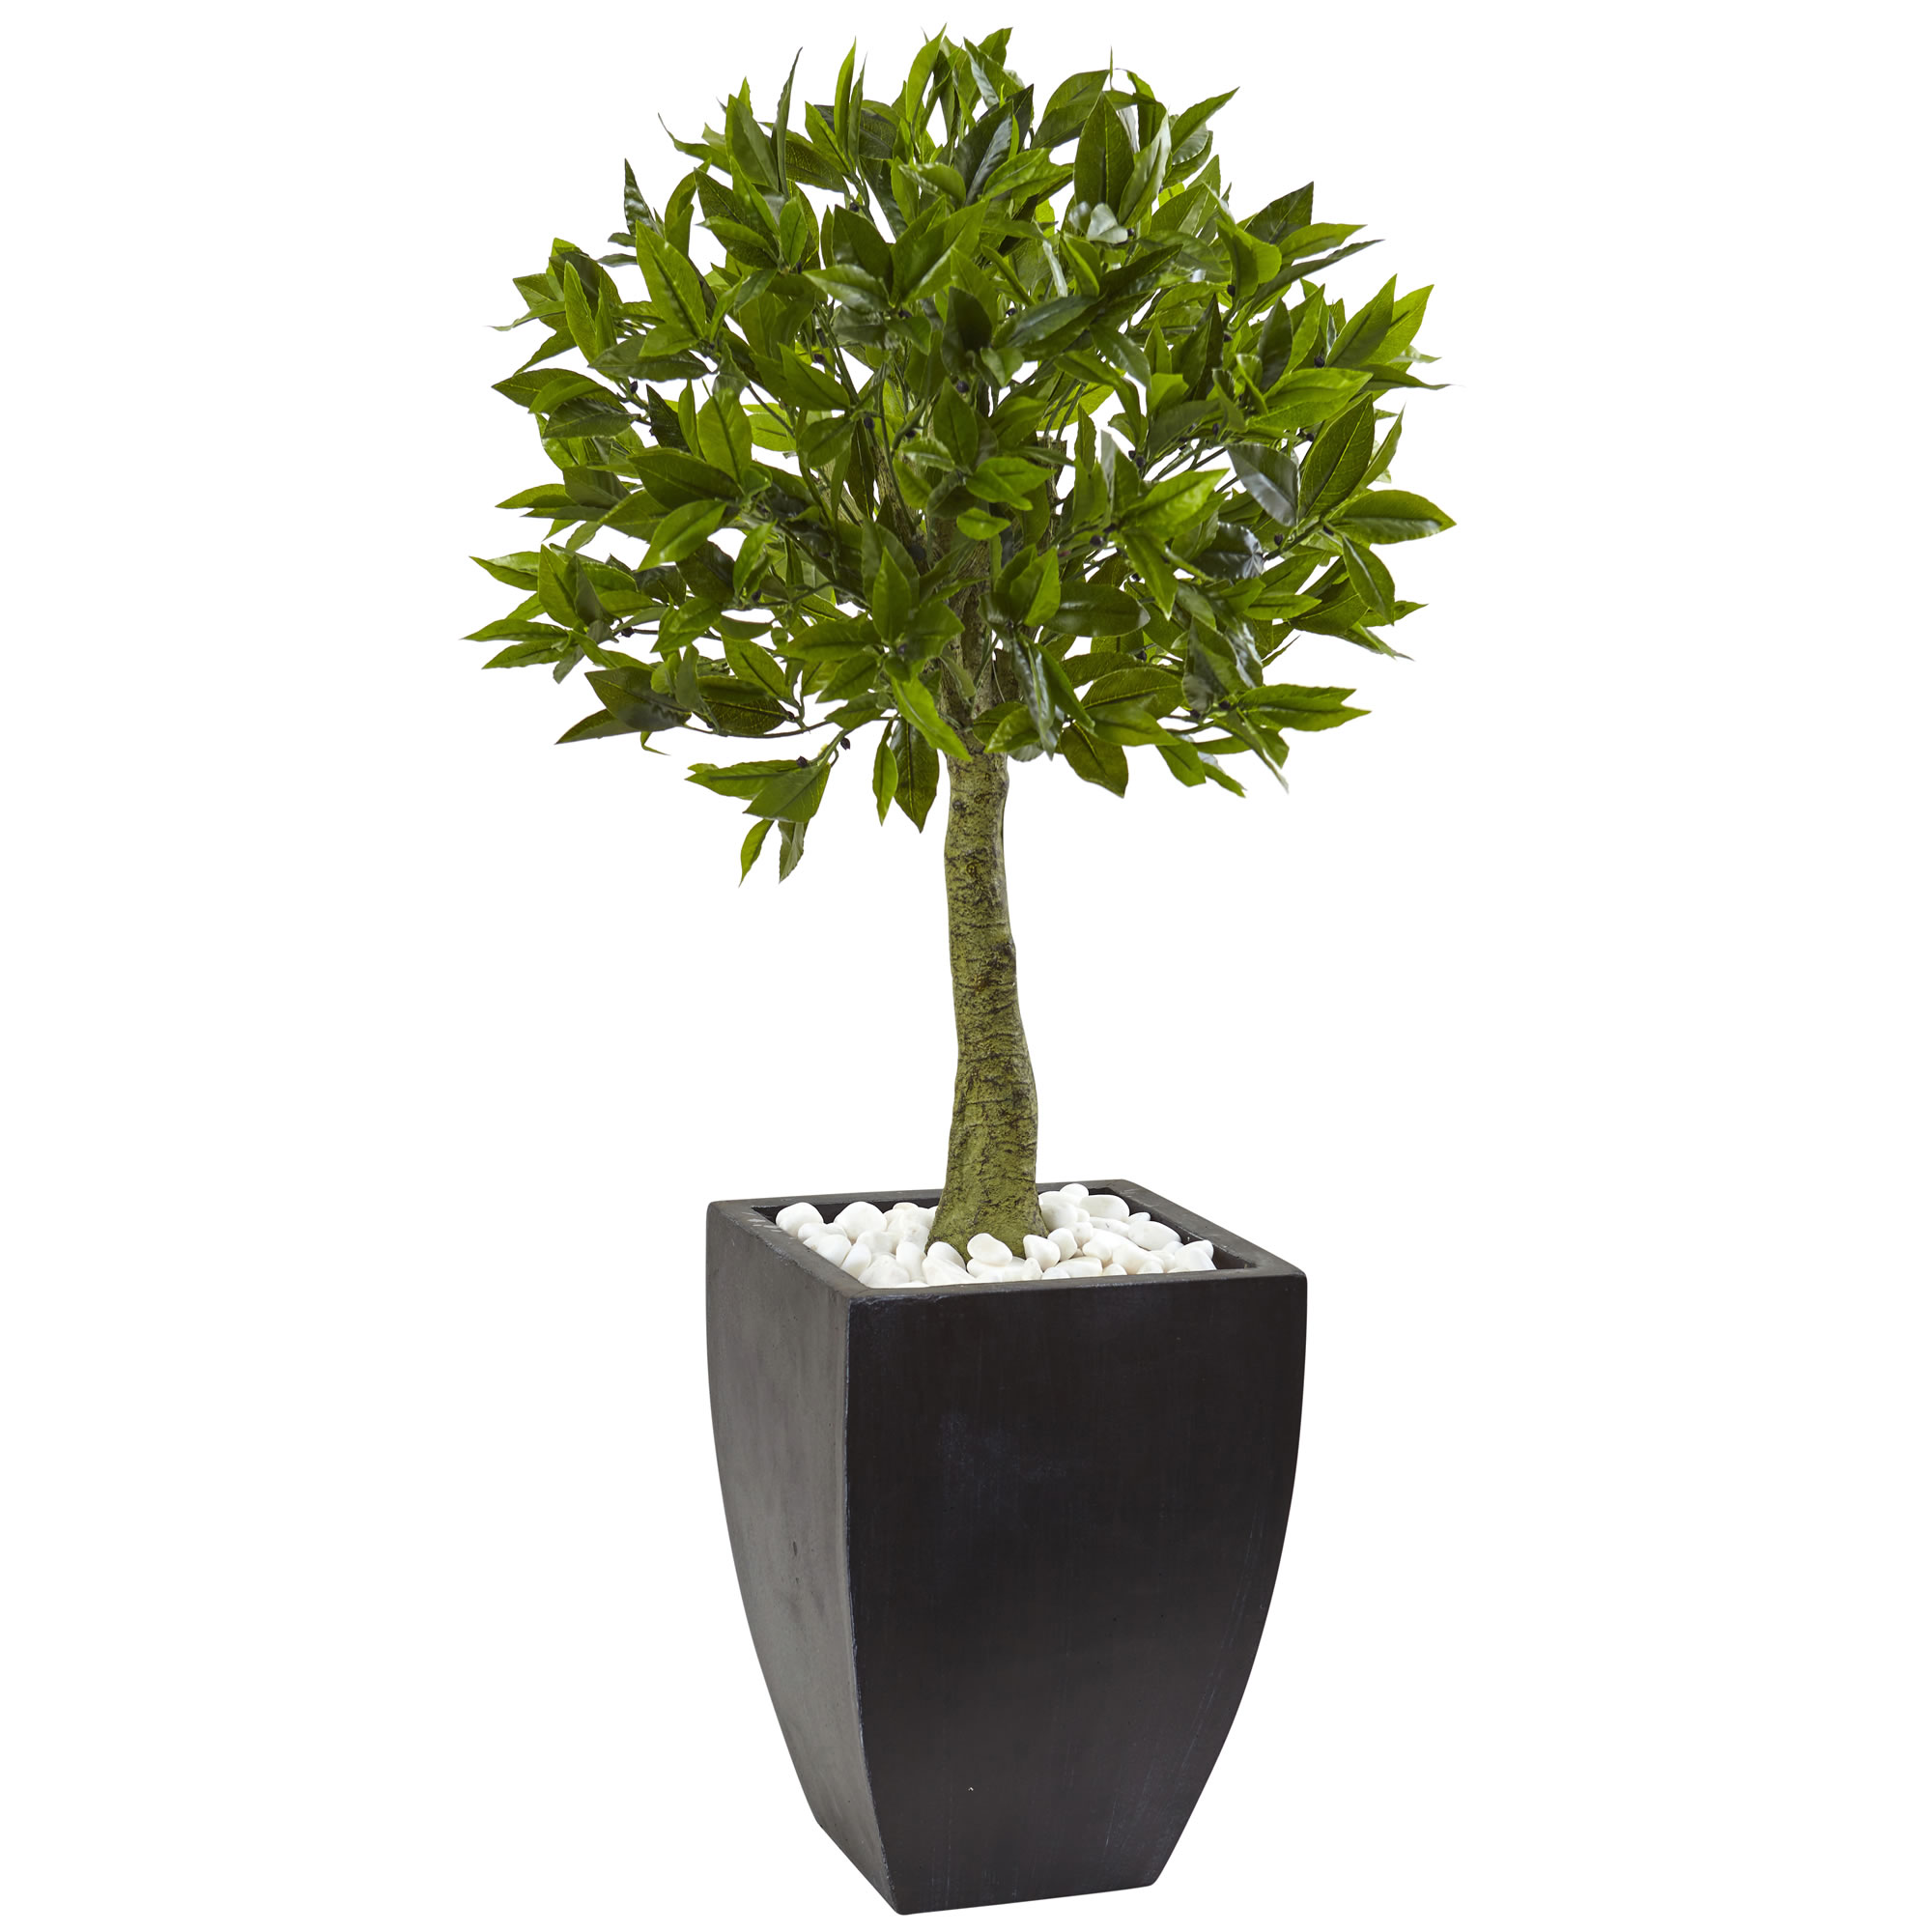 42 Inch Bay Leaf Topiary In Black Wash Planter: Limited Uv Protection